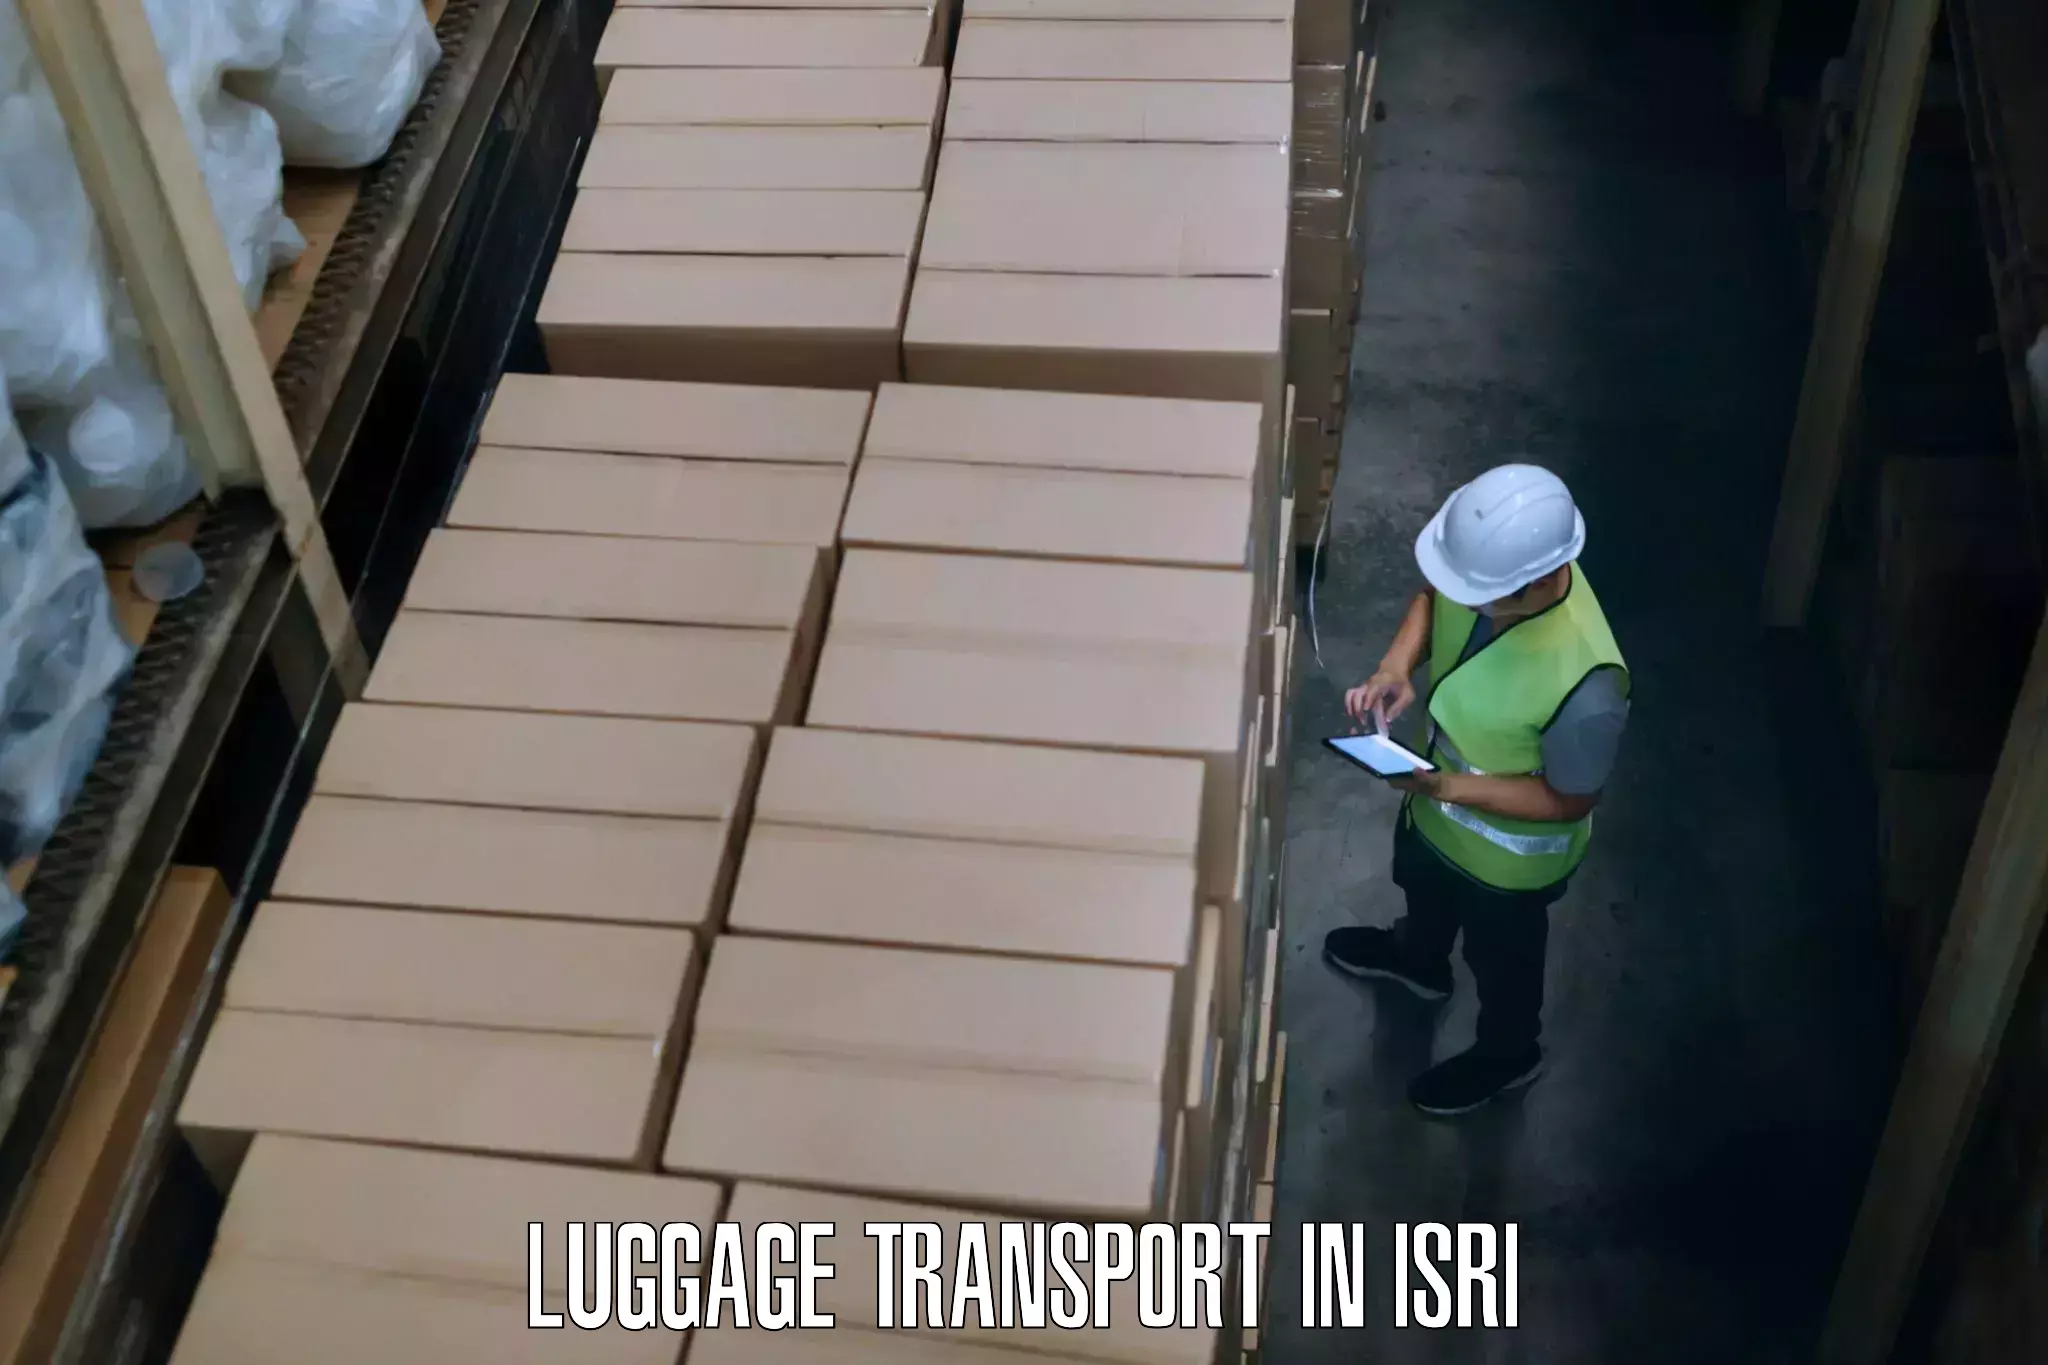 Instant baggage transport quote in Isri